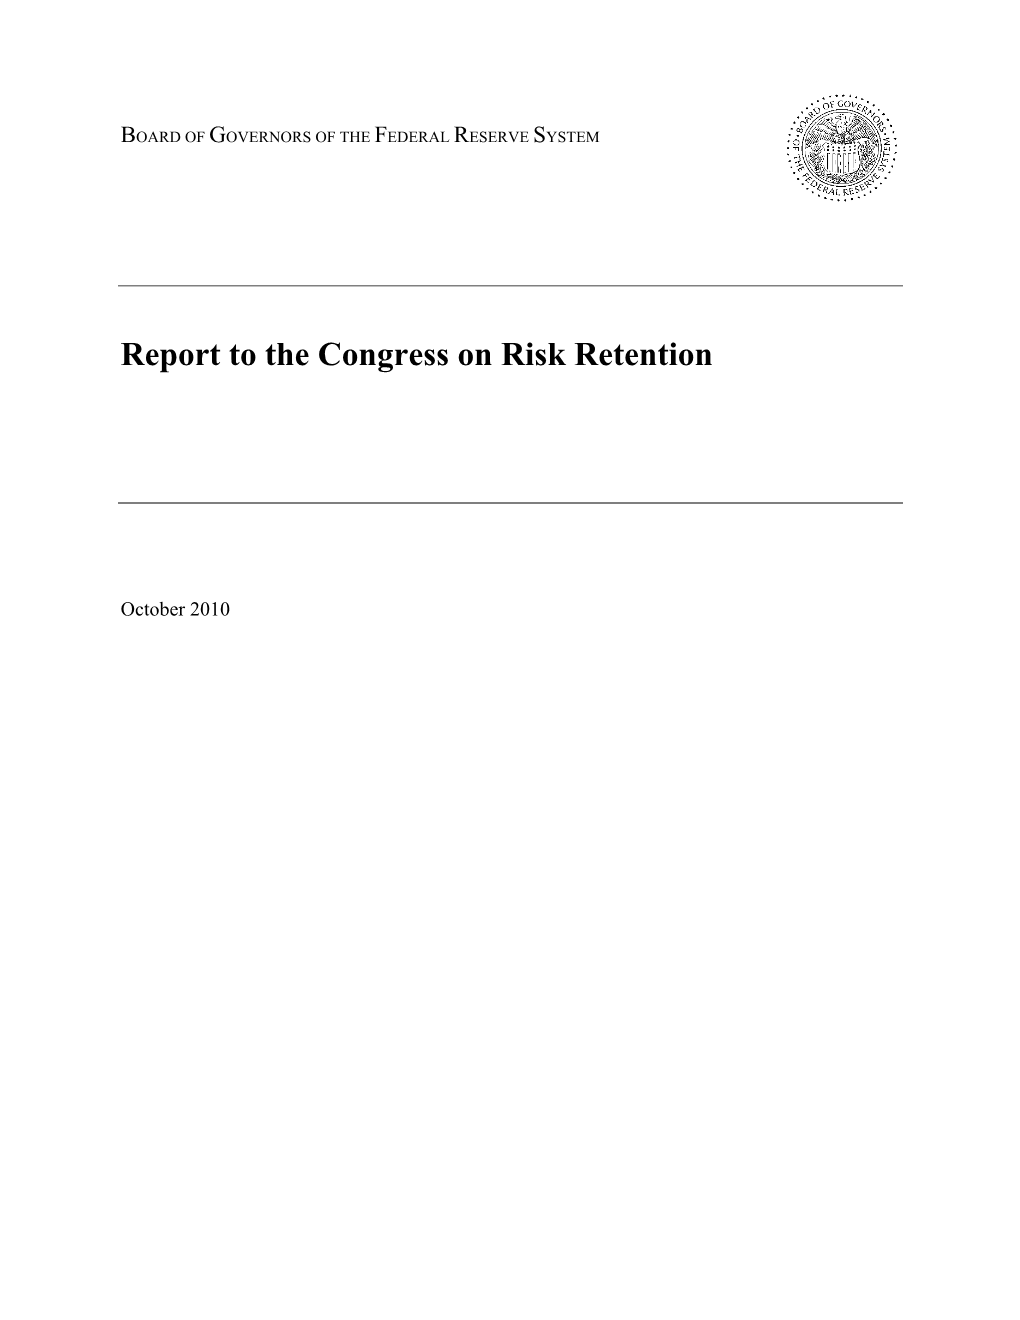 Report to the Congress on Risk Retention